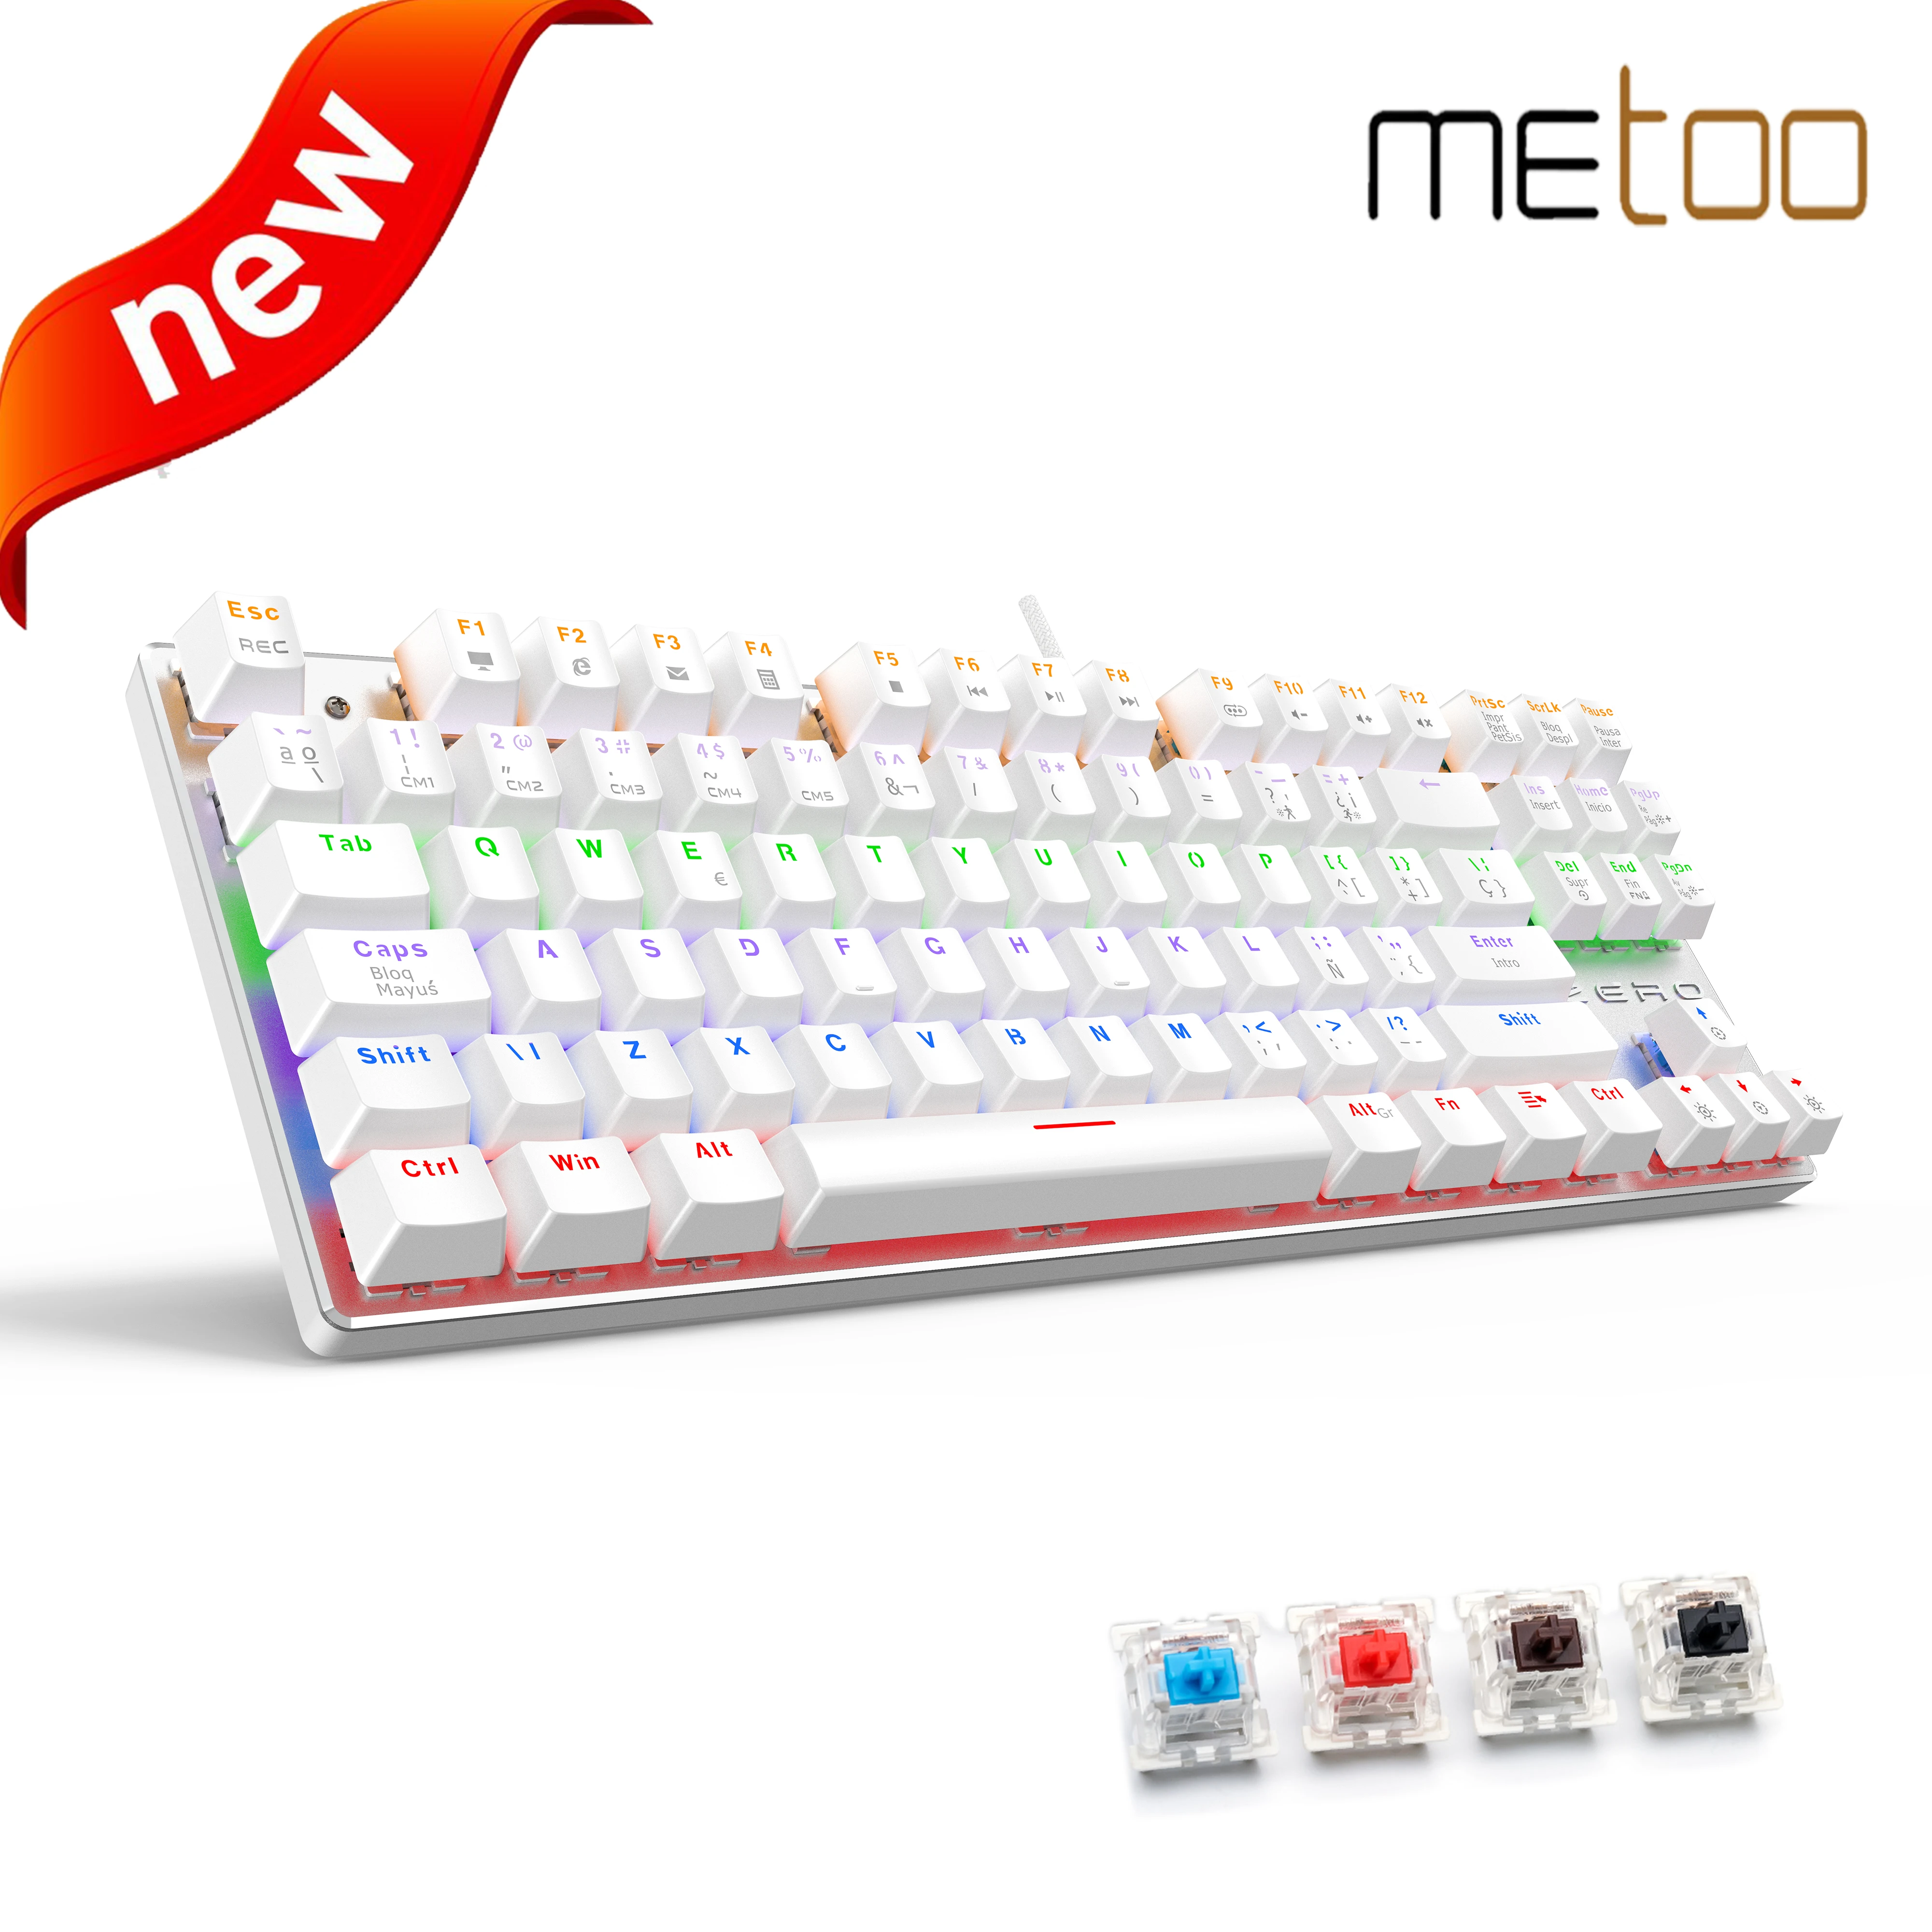 Metoo Edition Gaming Mechanical Keyboard 87 104keys LED Backlit red Axis Russian US Spanish For Game Laptop PC